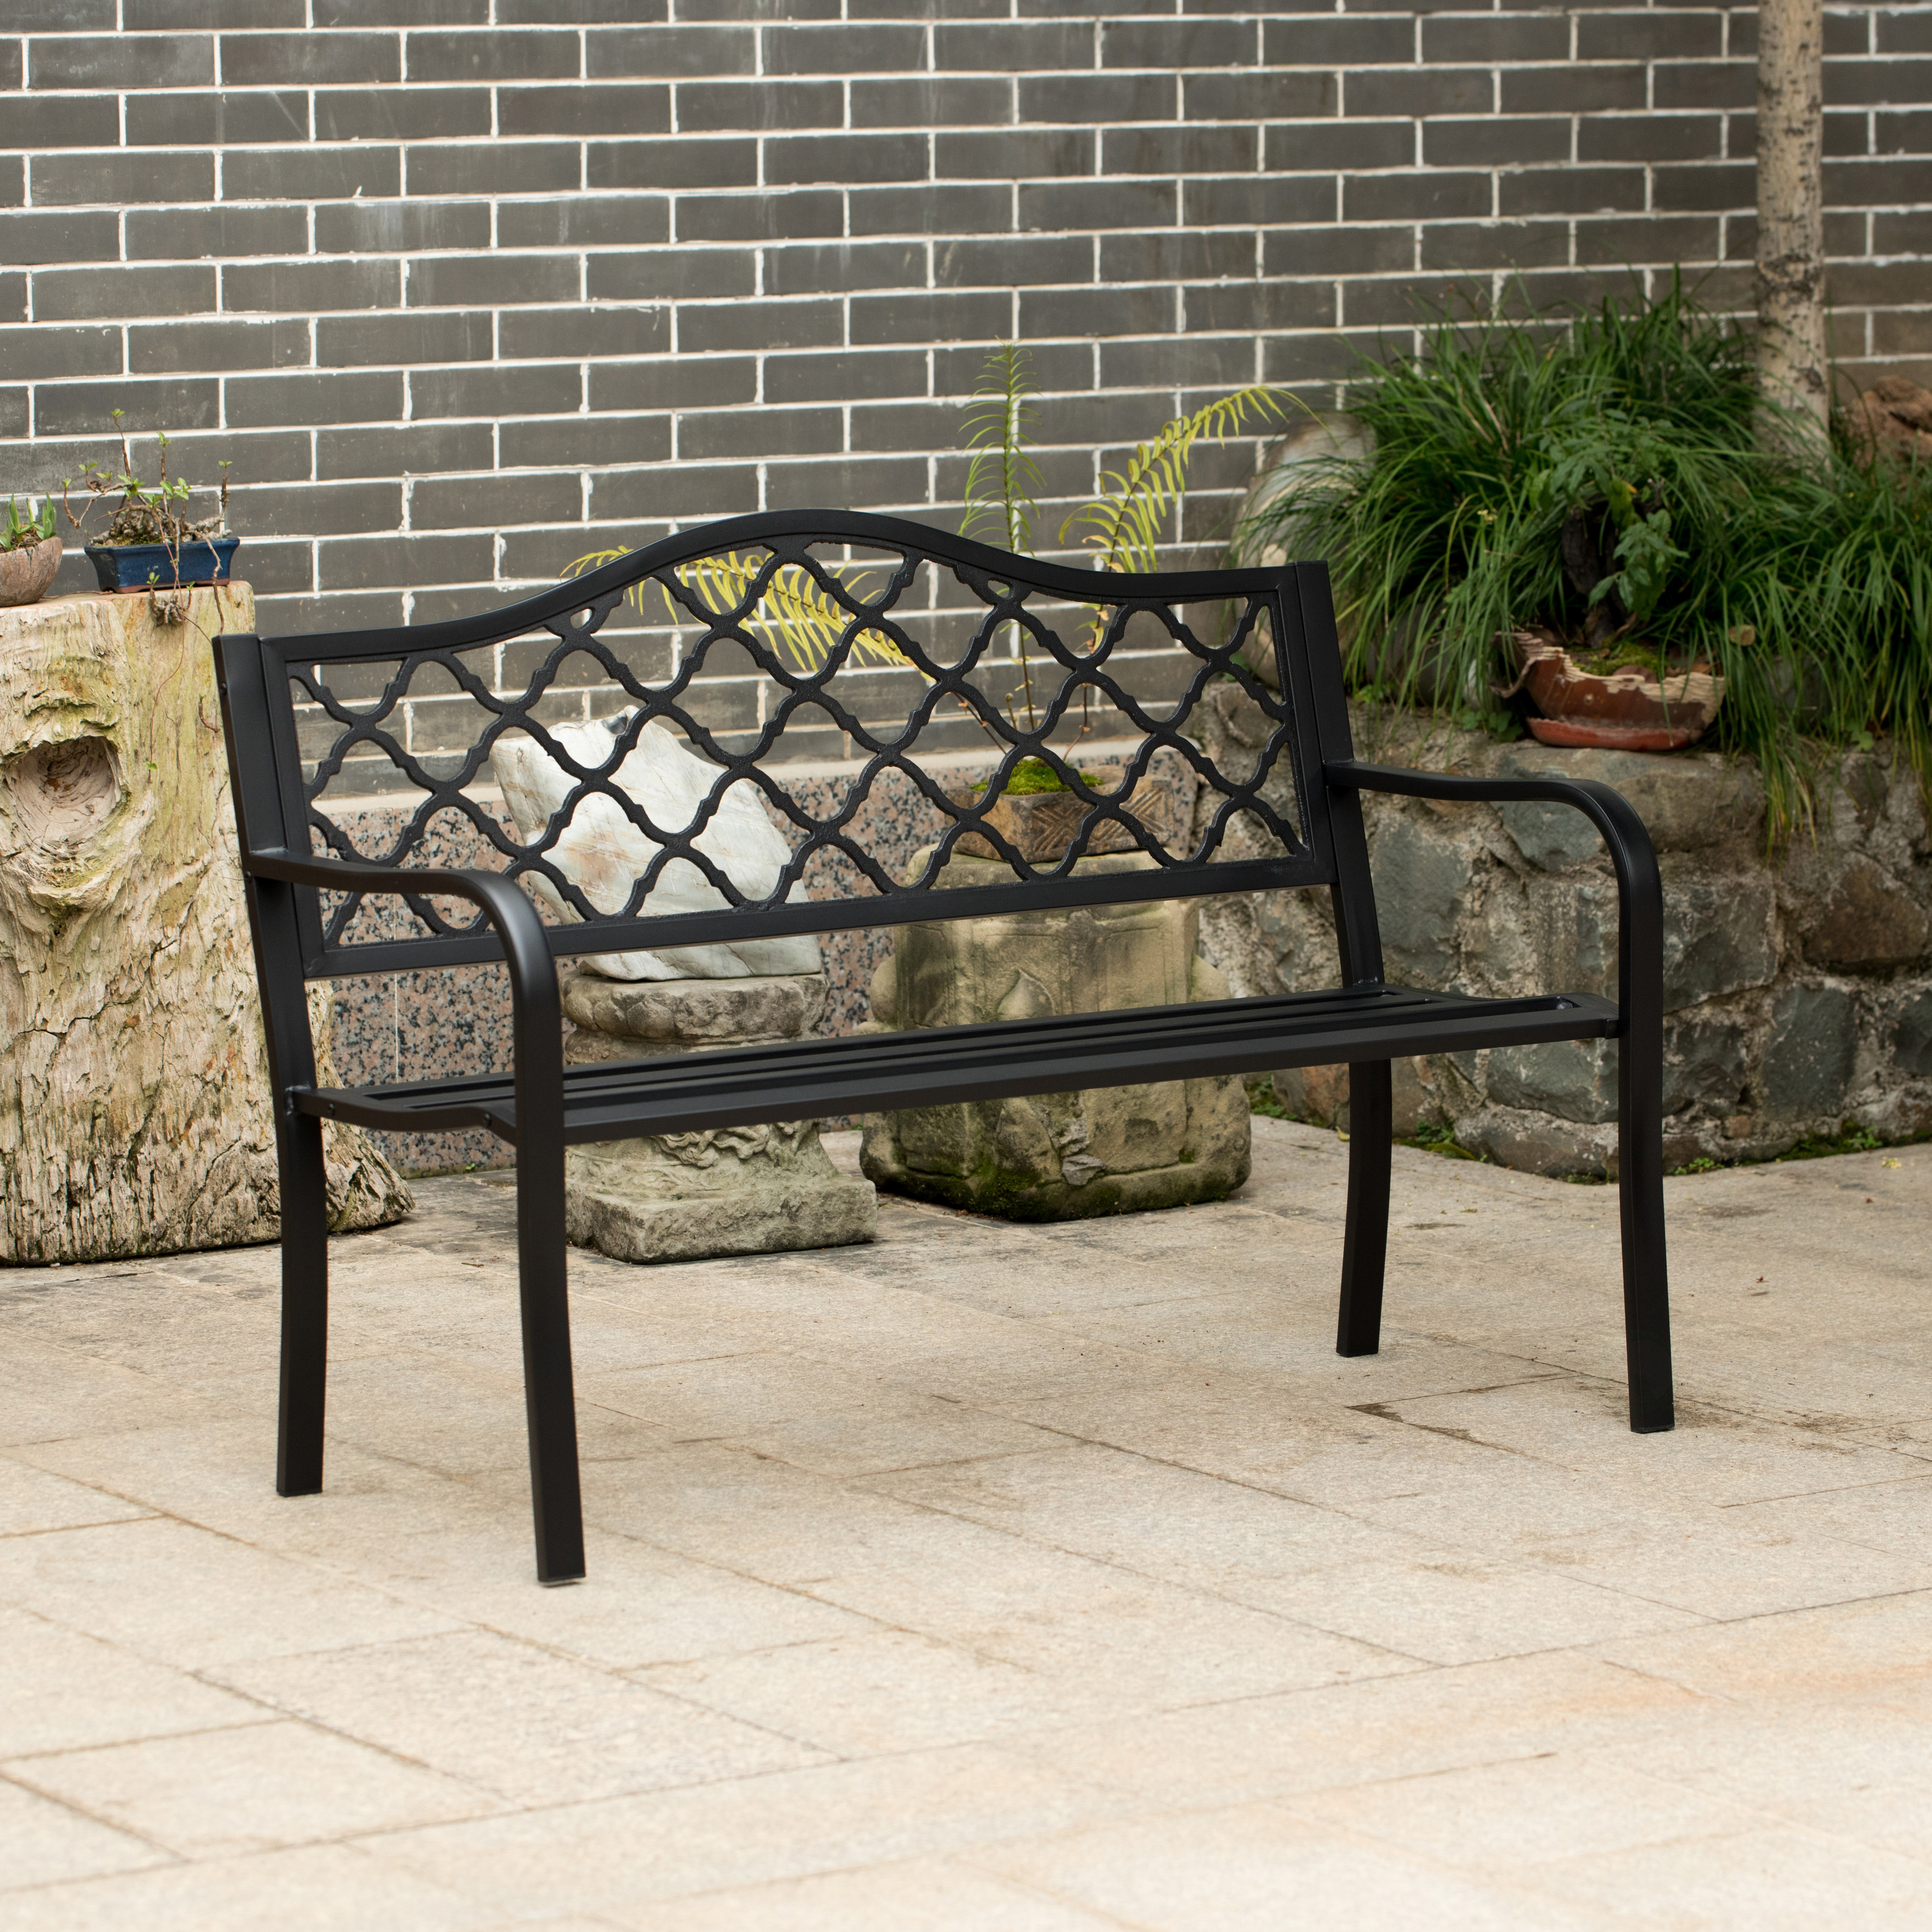 Gardenised Outdoor Garden Patio Steel Park Bench Lawn Decor With Cast Iron Back, Black Seating Bench For Yard, Patio, Garden And Deck